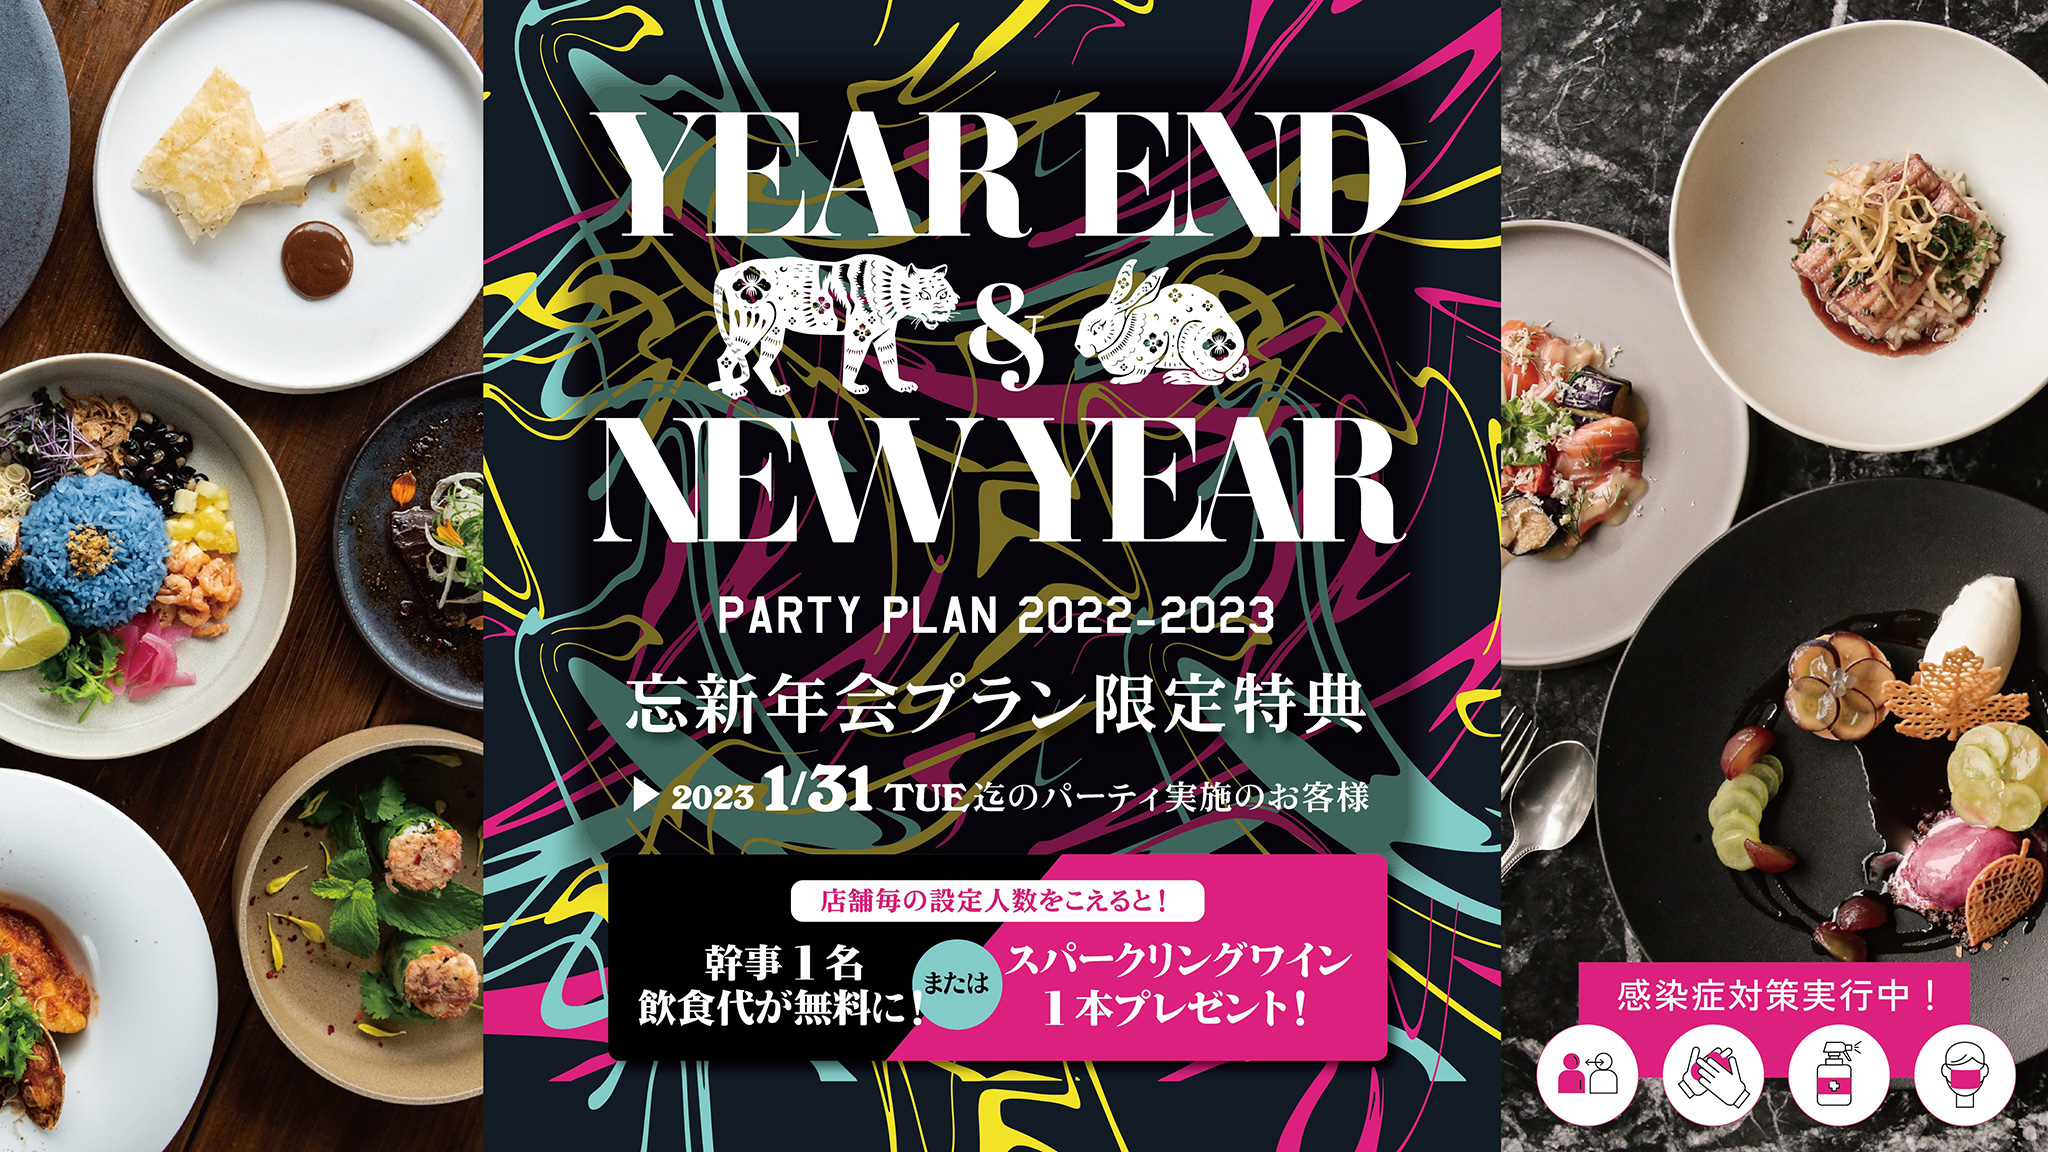 YEAR END & NEW TEAR　PARTY PLAN 2022-2023　忘新年会プラン限定特典